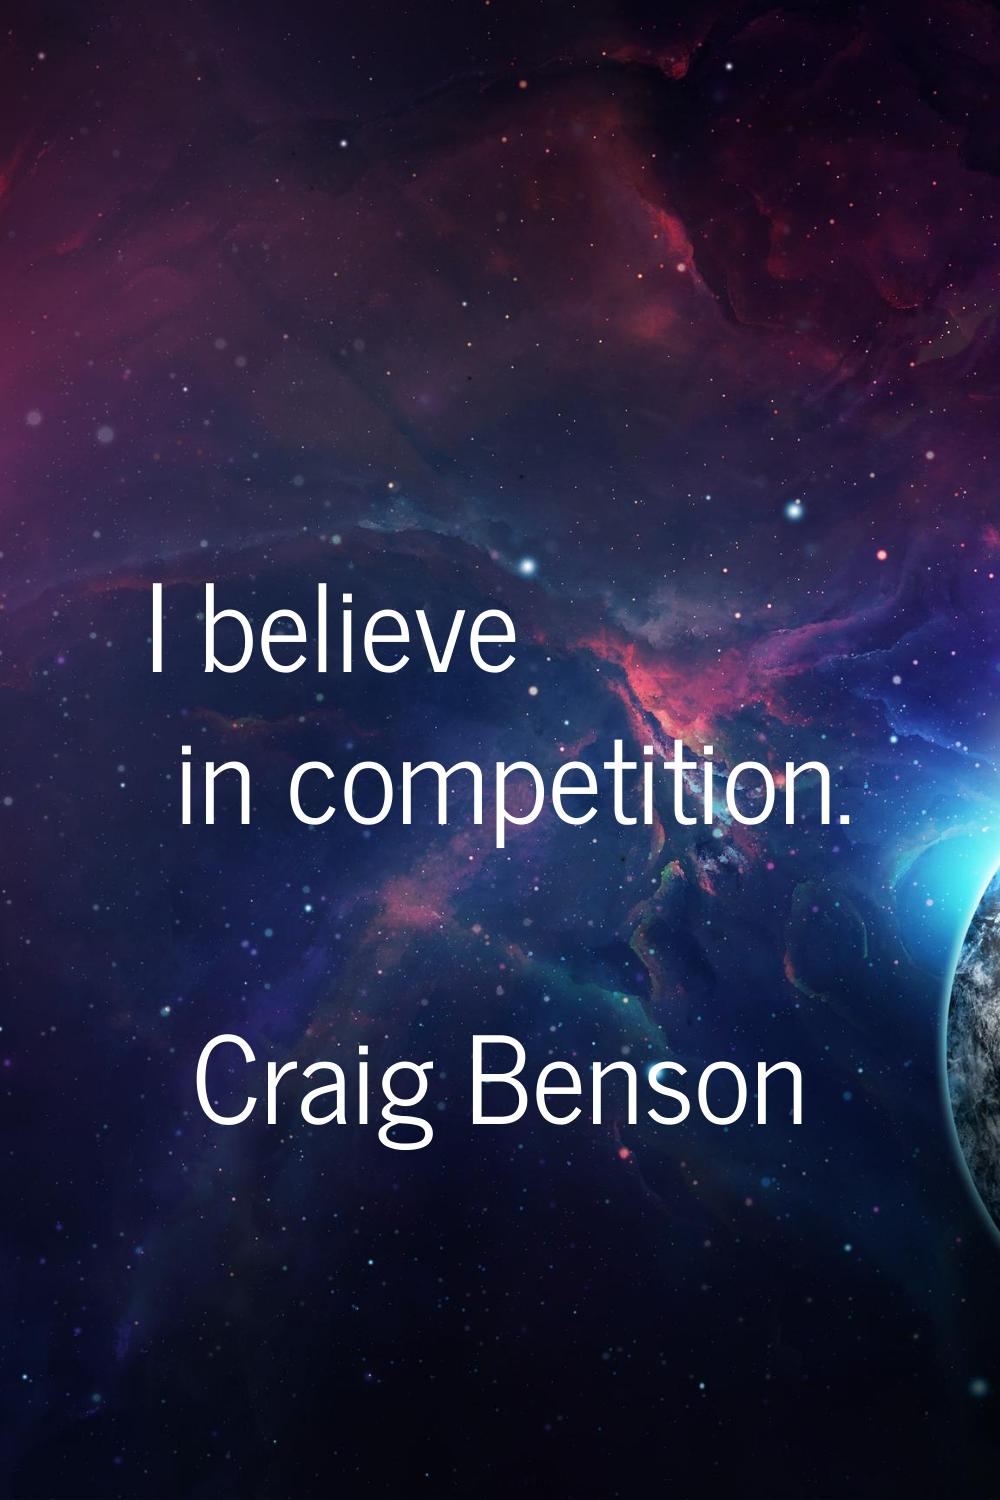 I believe in competition.